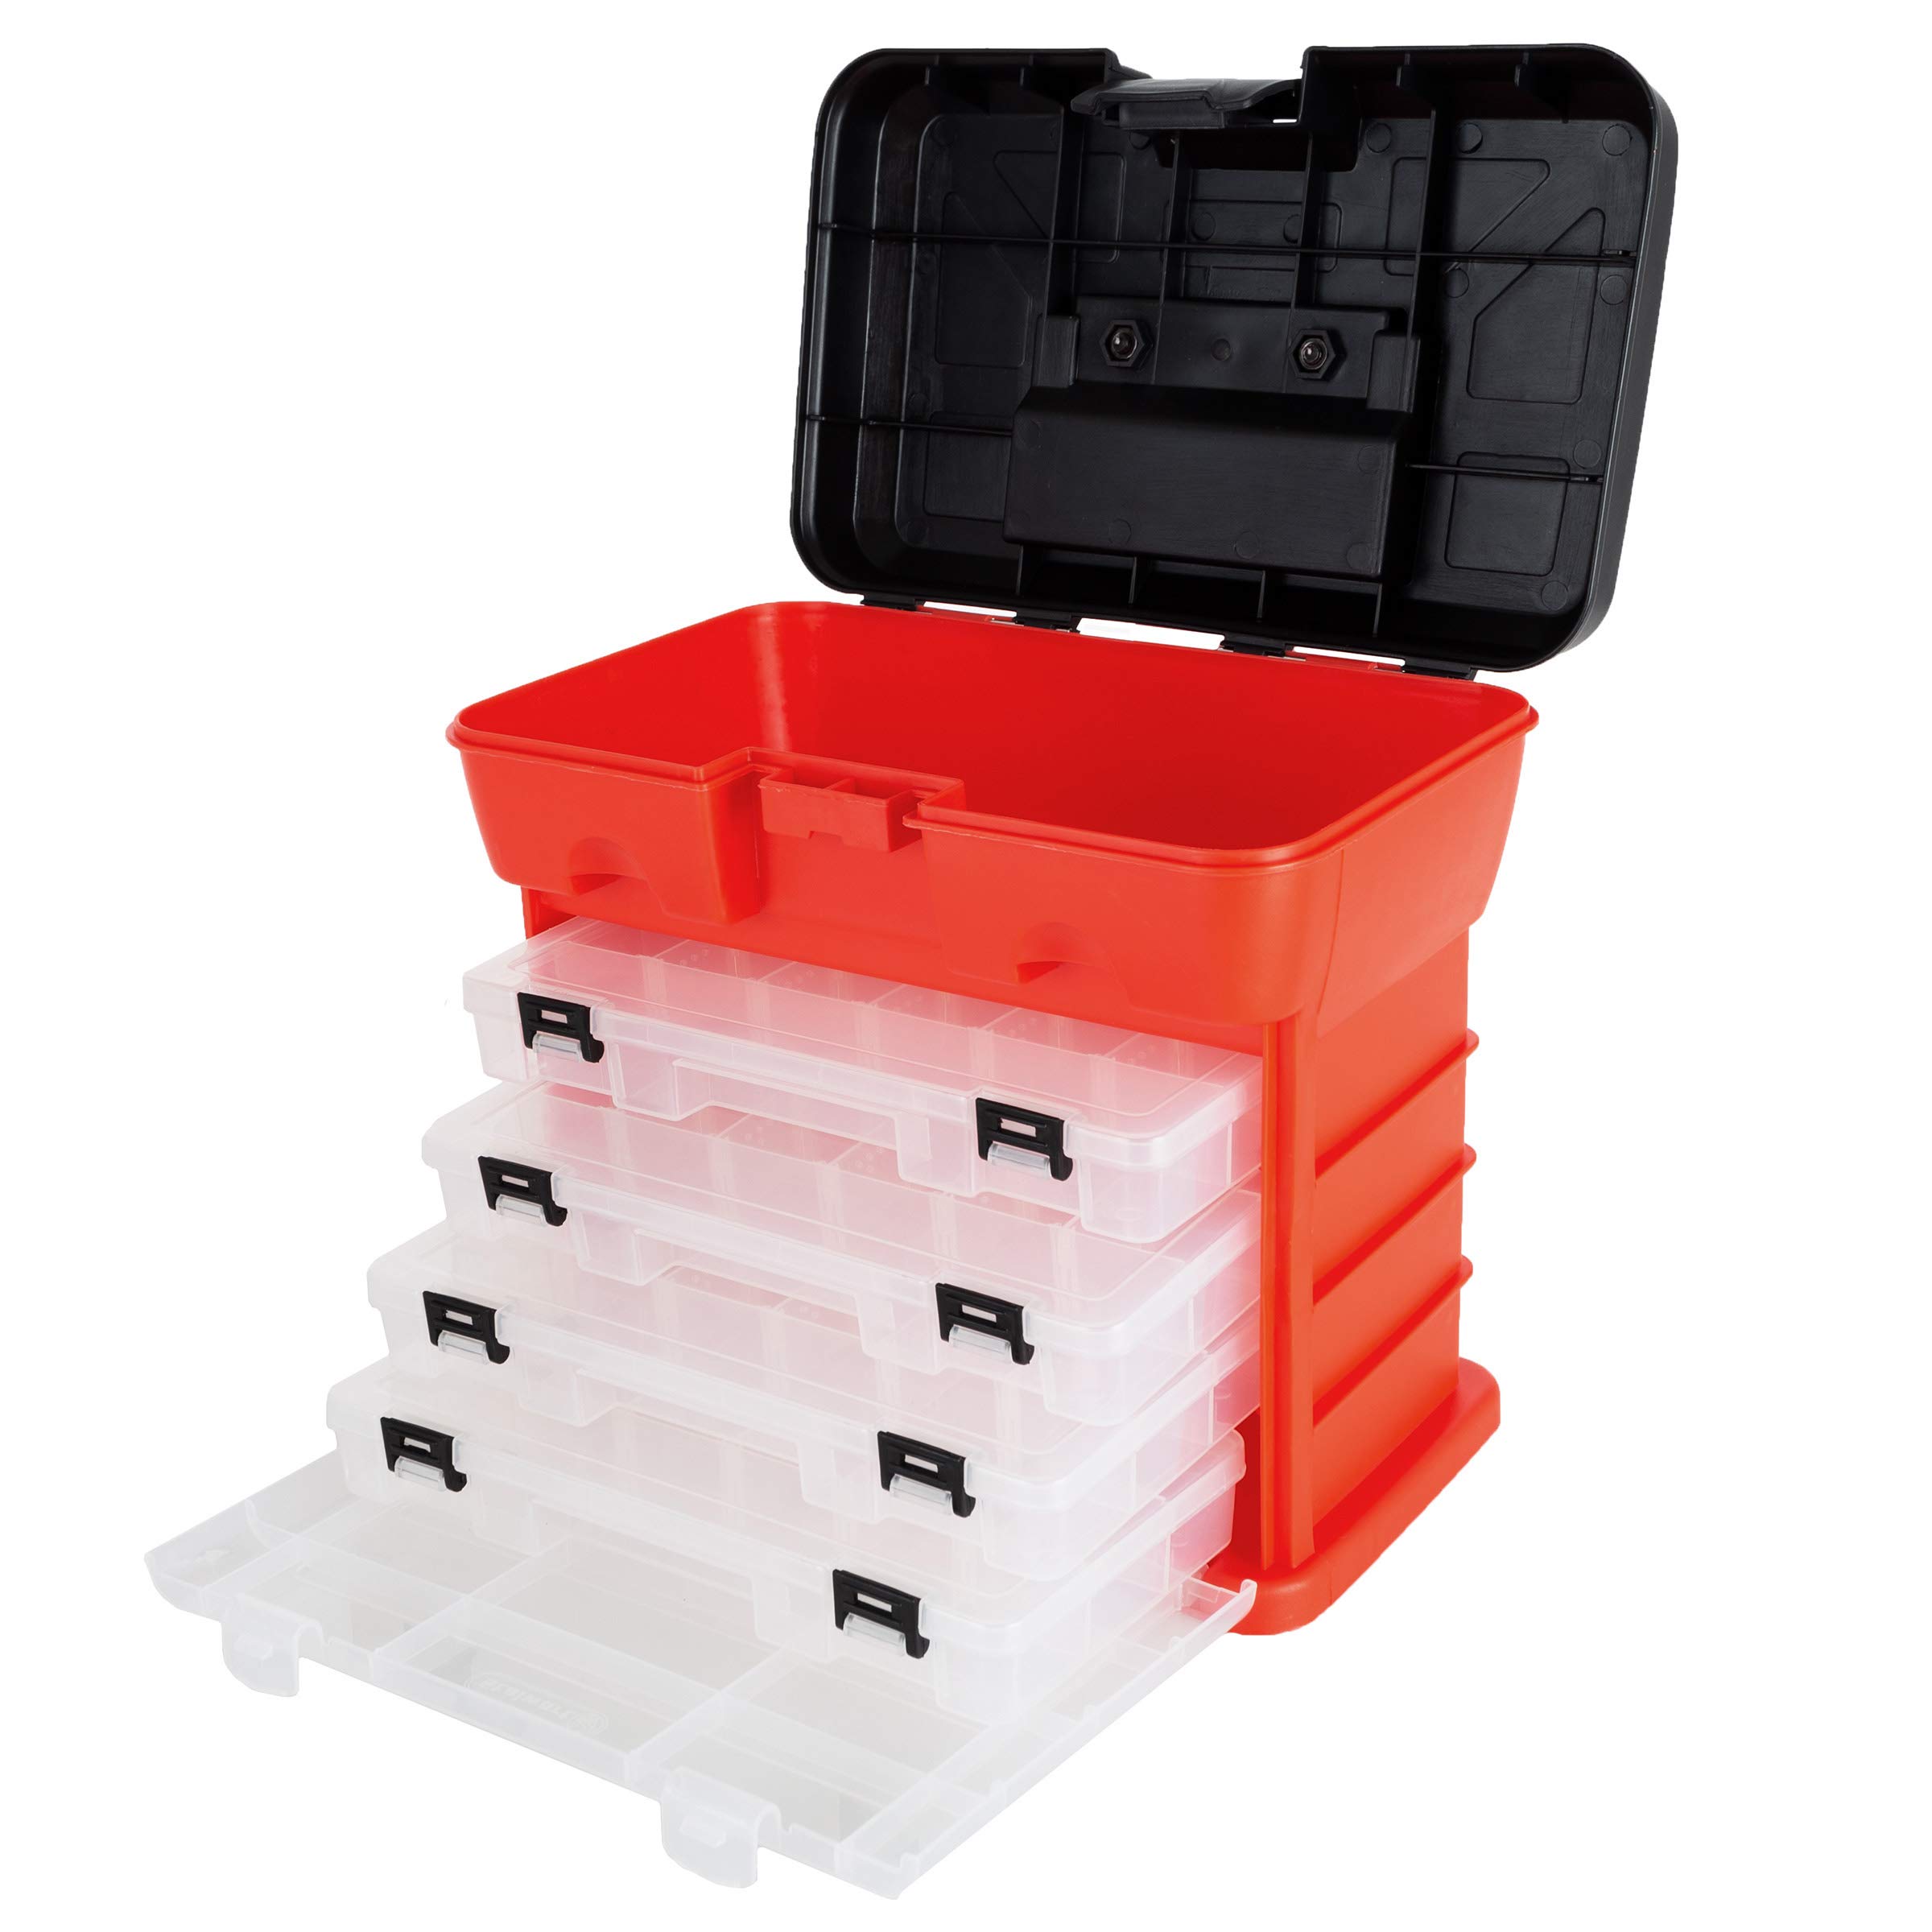 Stalwart Portable Tool Storage Box & Small Parts Organizer w/ 4 Multi-Compartment Trays & Carry Handle $15.10 + Free Shipping w/ Prime or on $35+